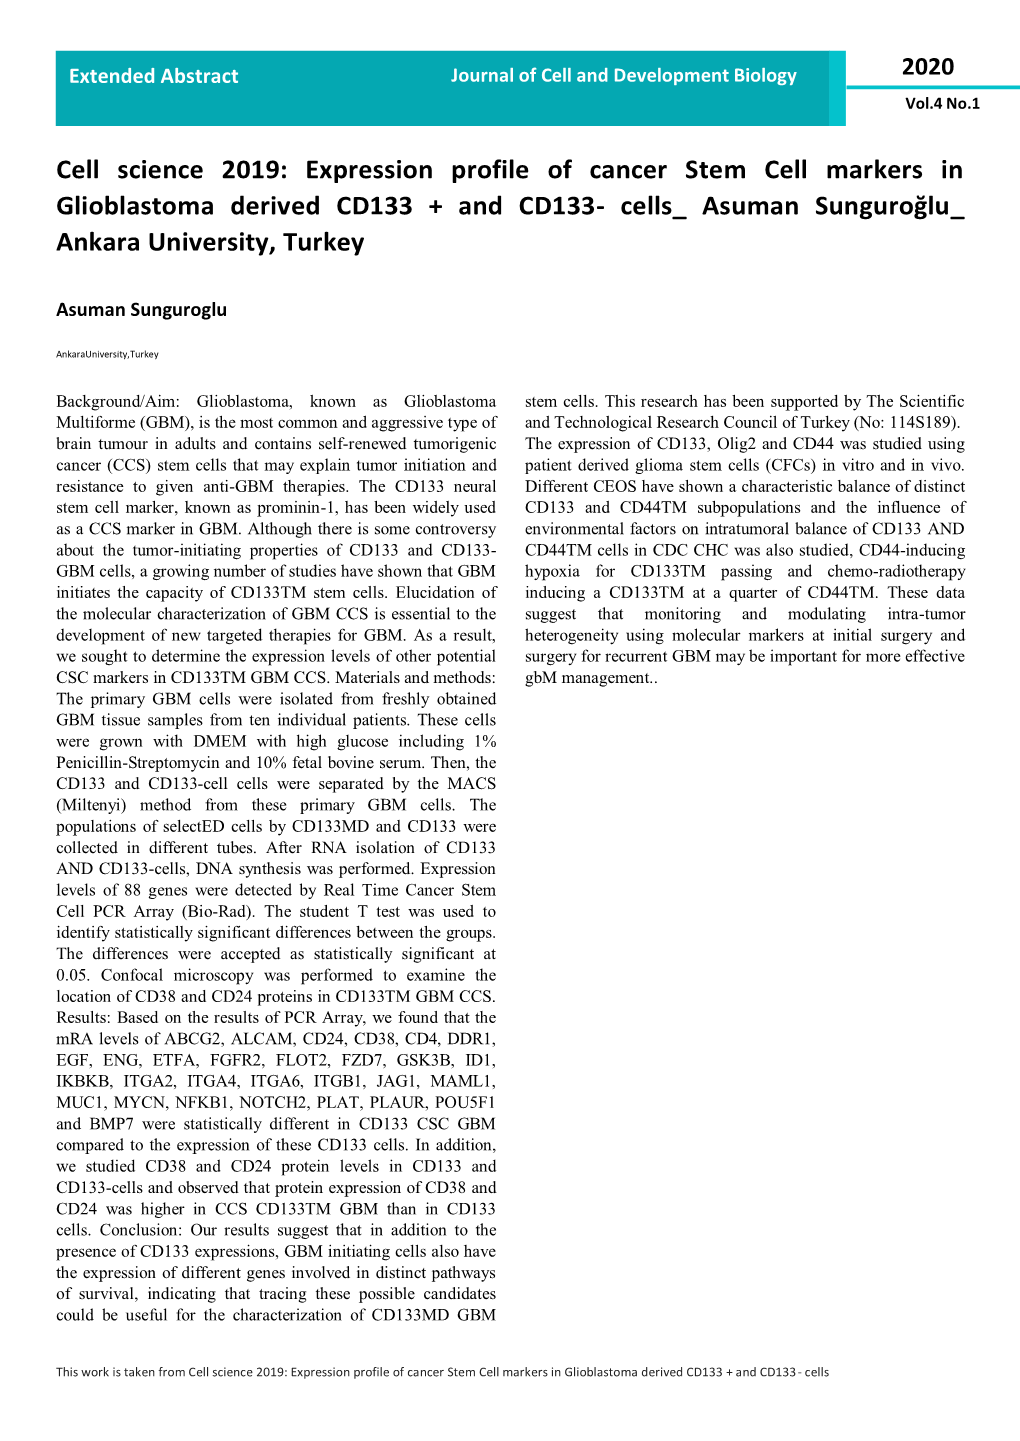 Expression Profile of Cancer Stem Cell Markers in Glioblastoma Derived CD133 + and CD133- Cells Asuman Sunguroğlu Ankara University, Turkey